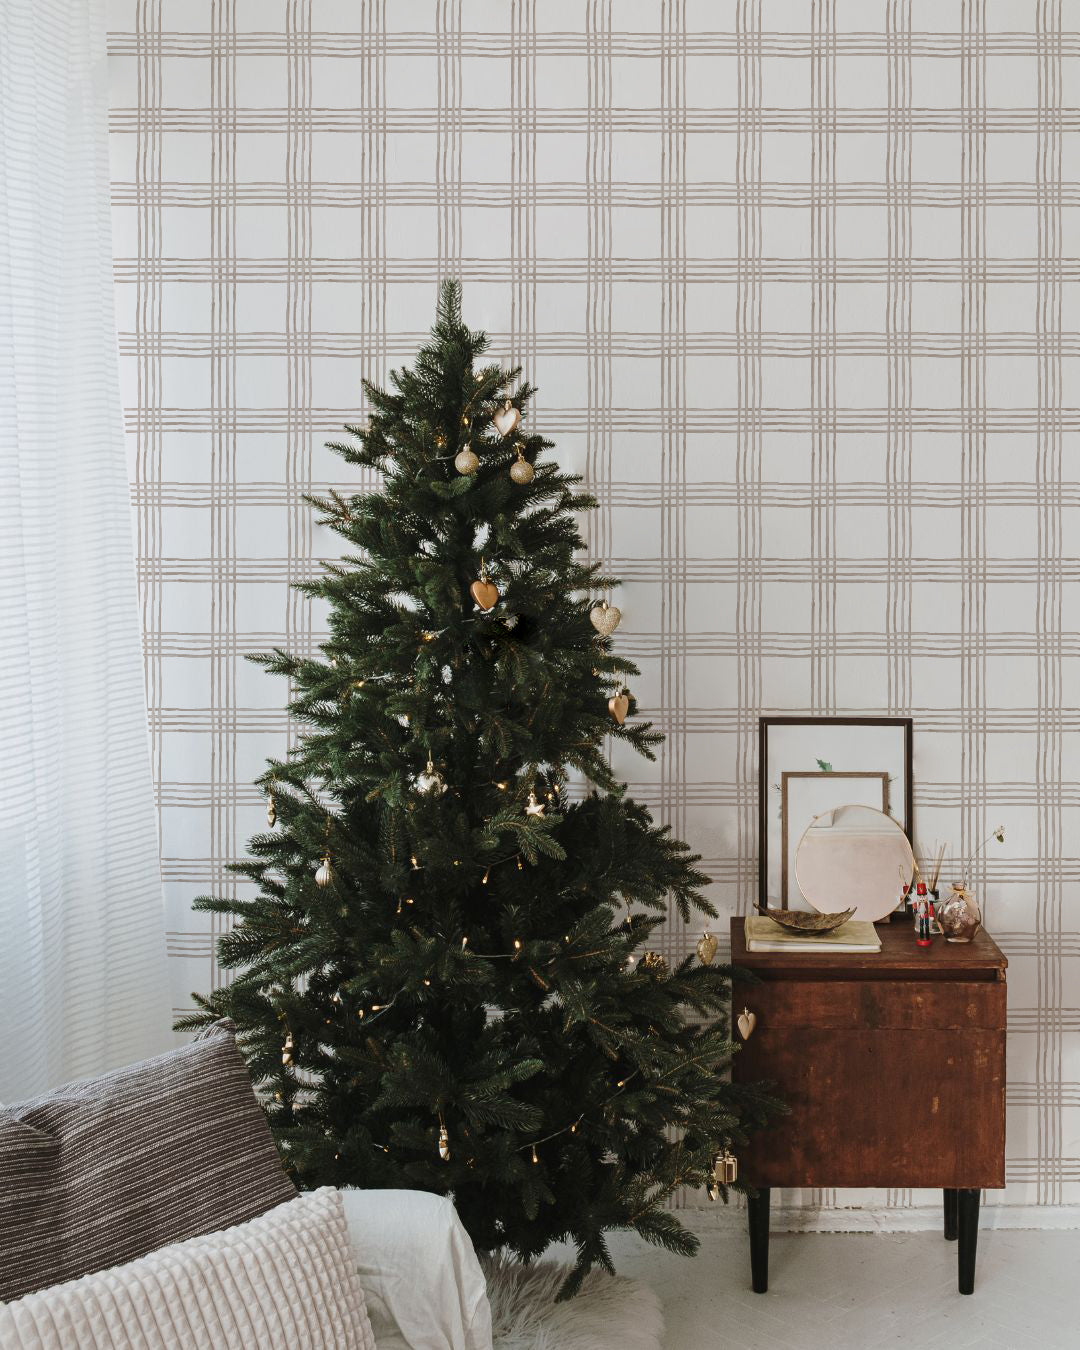 Wrap Up Style: Why Wallpaper Makes the Perfect Christmas Gift